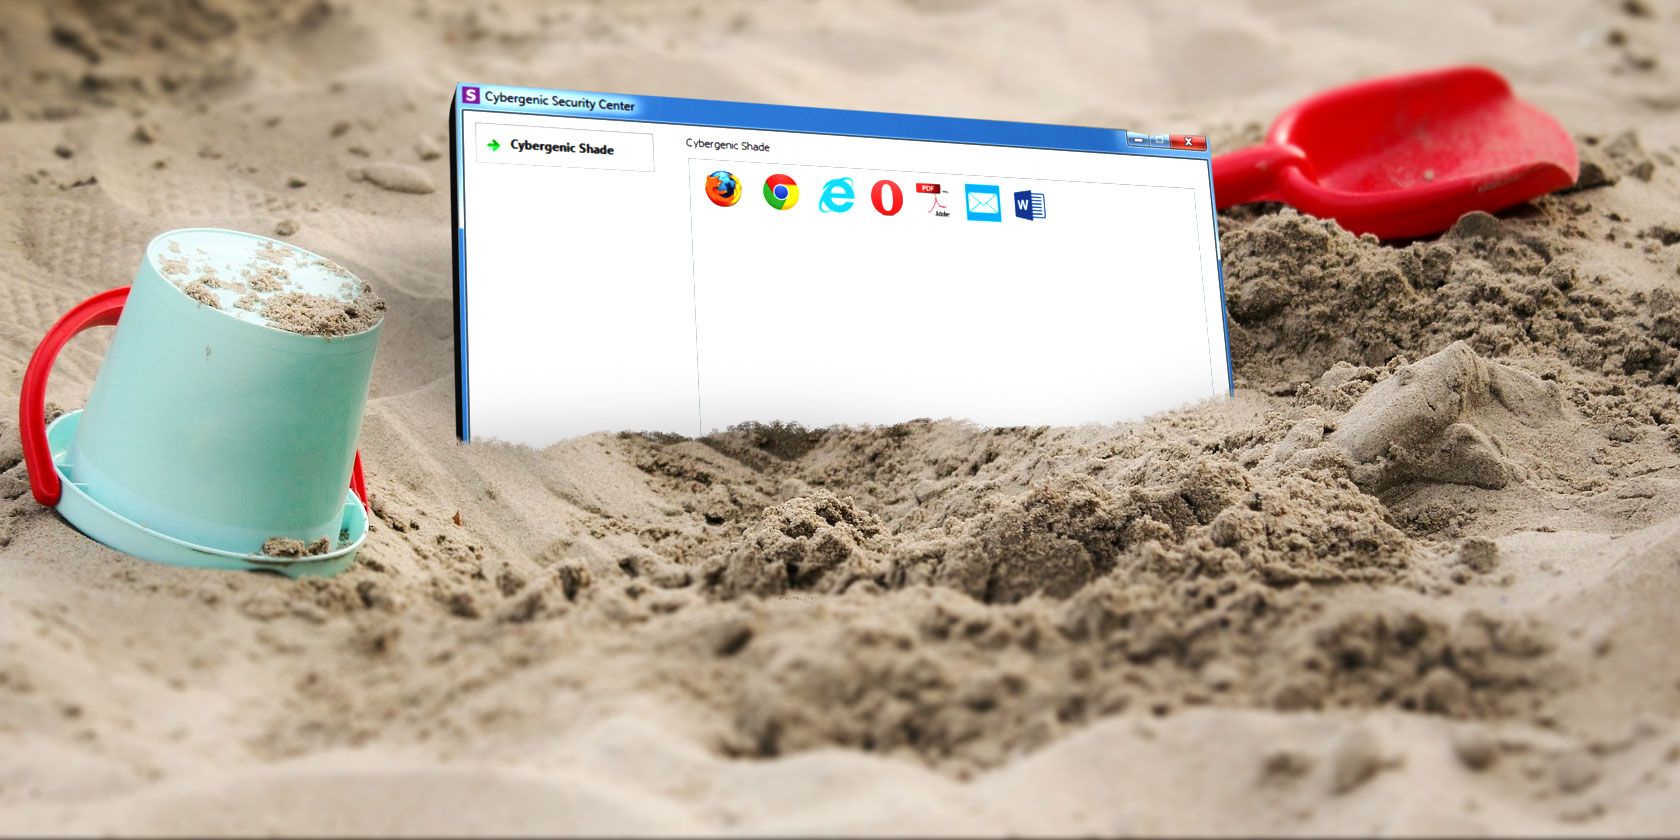 is there software for sandboxing a disk in windows like superduper! for the mac